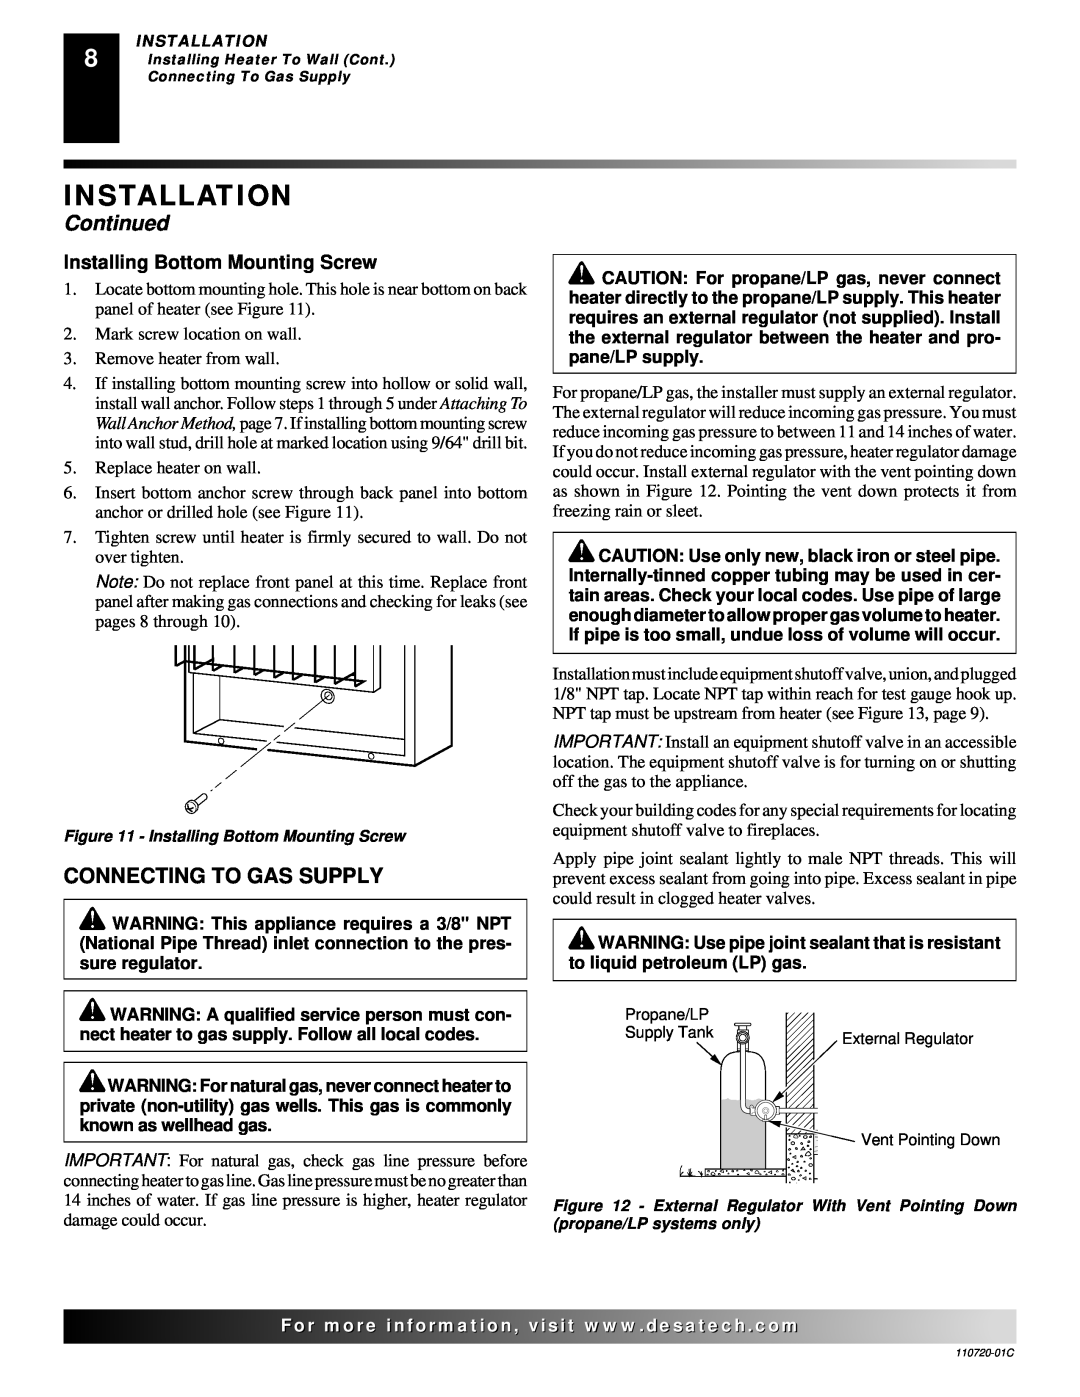 Desa VN10A installation manual Connecting To Gas Supply, Installing Bottom Mounting Screw, Installation, Continued 